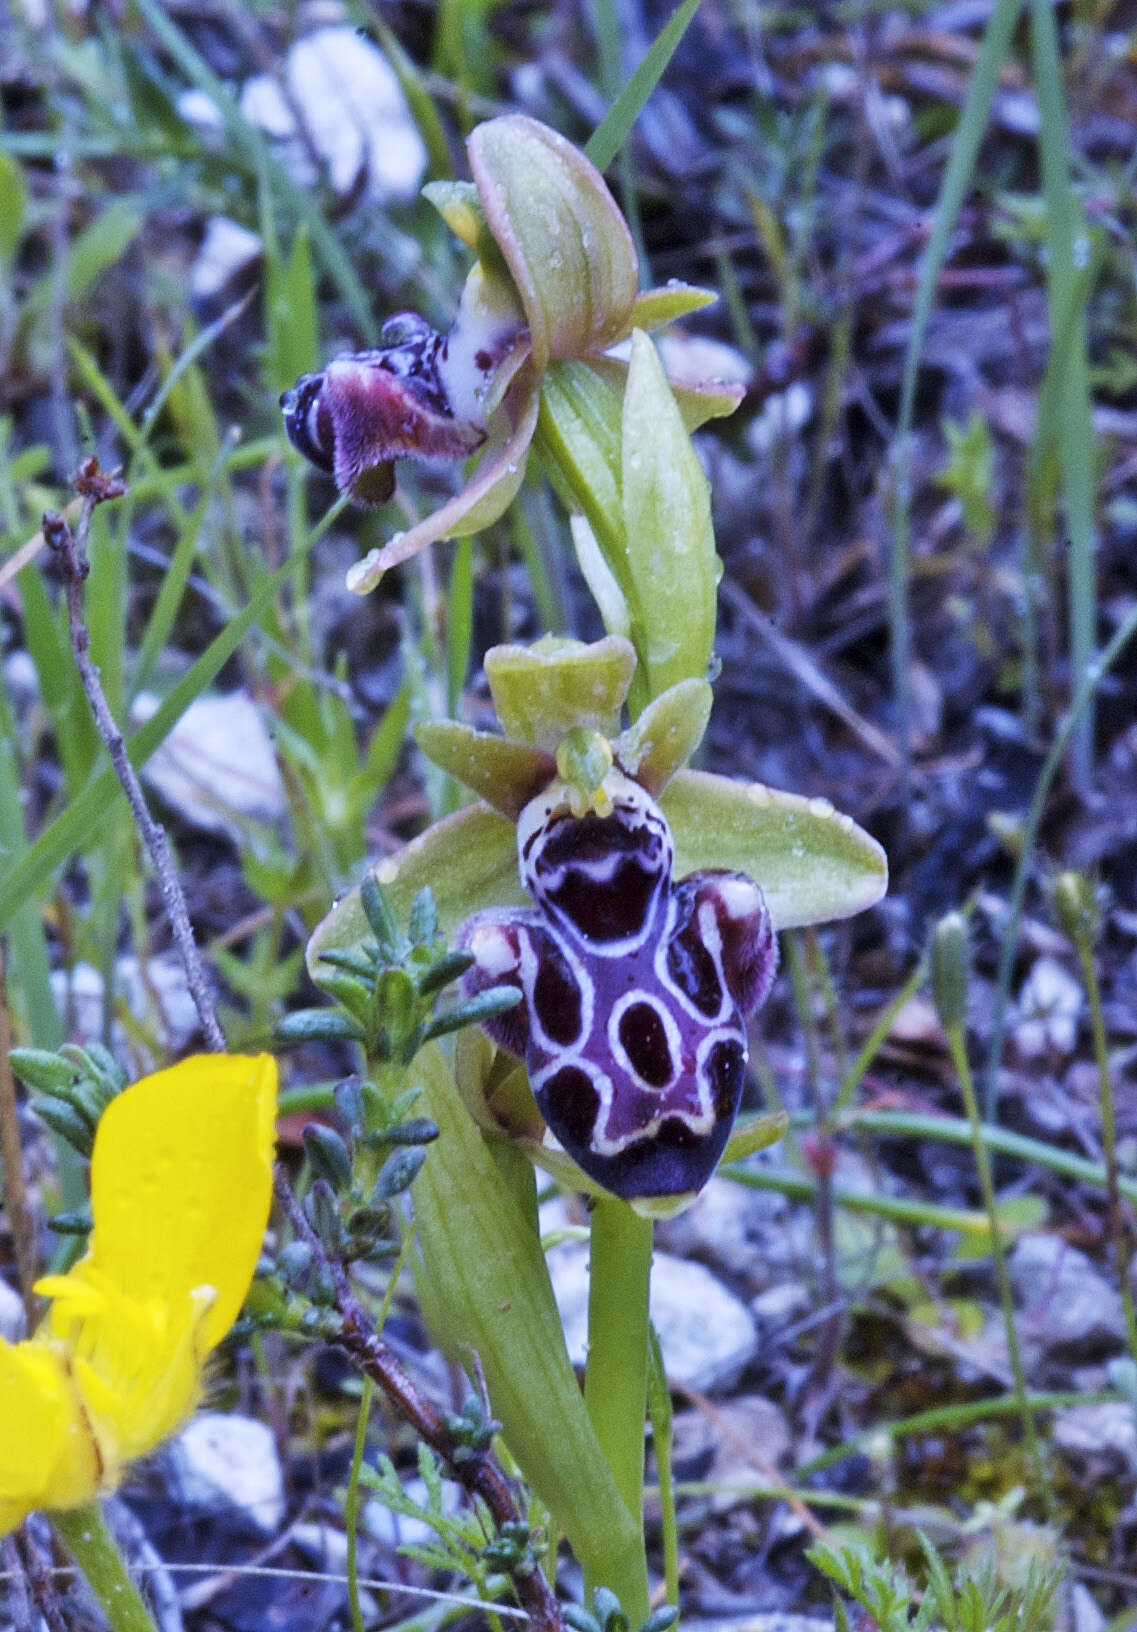 Image of Kotschy's Ophrys